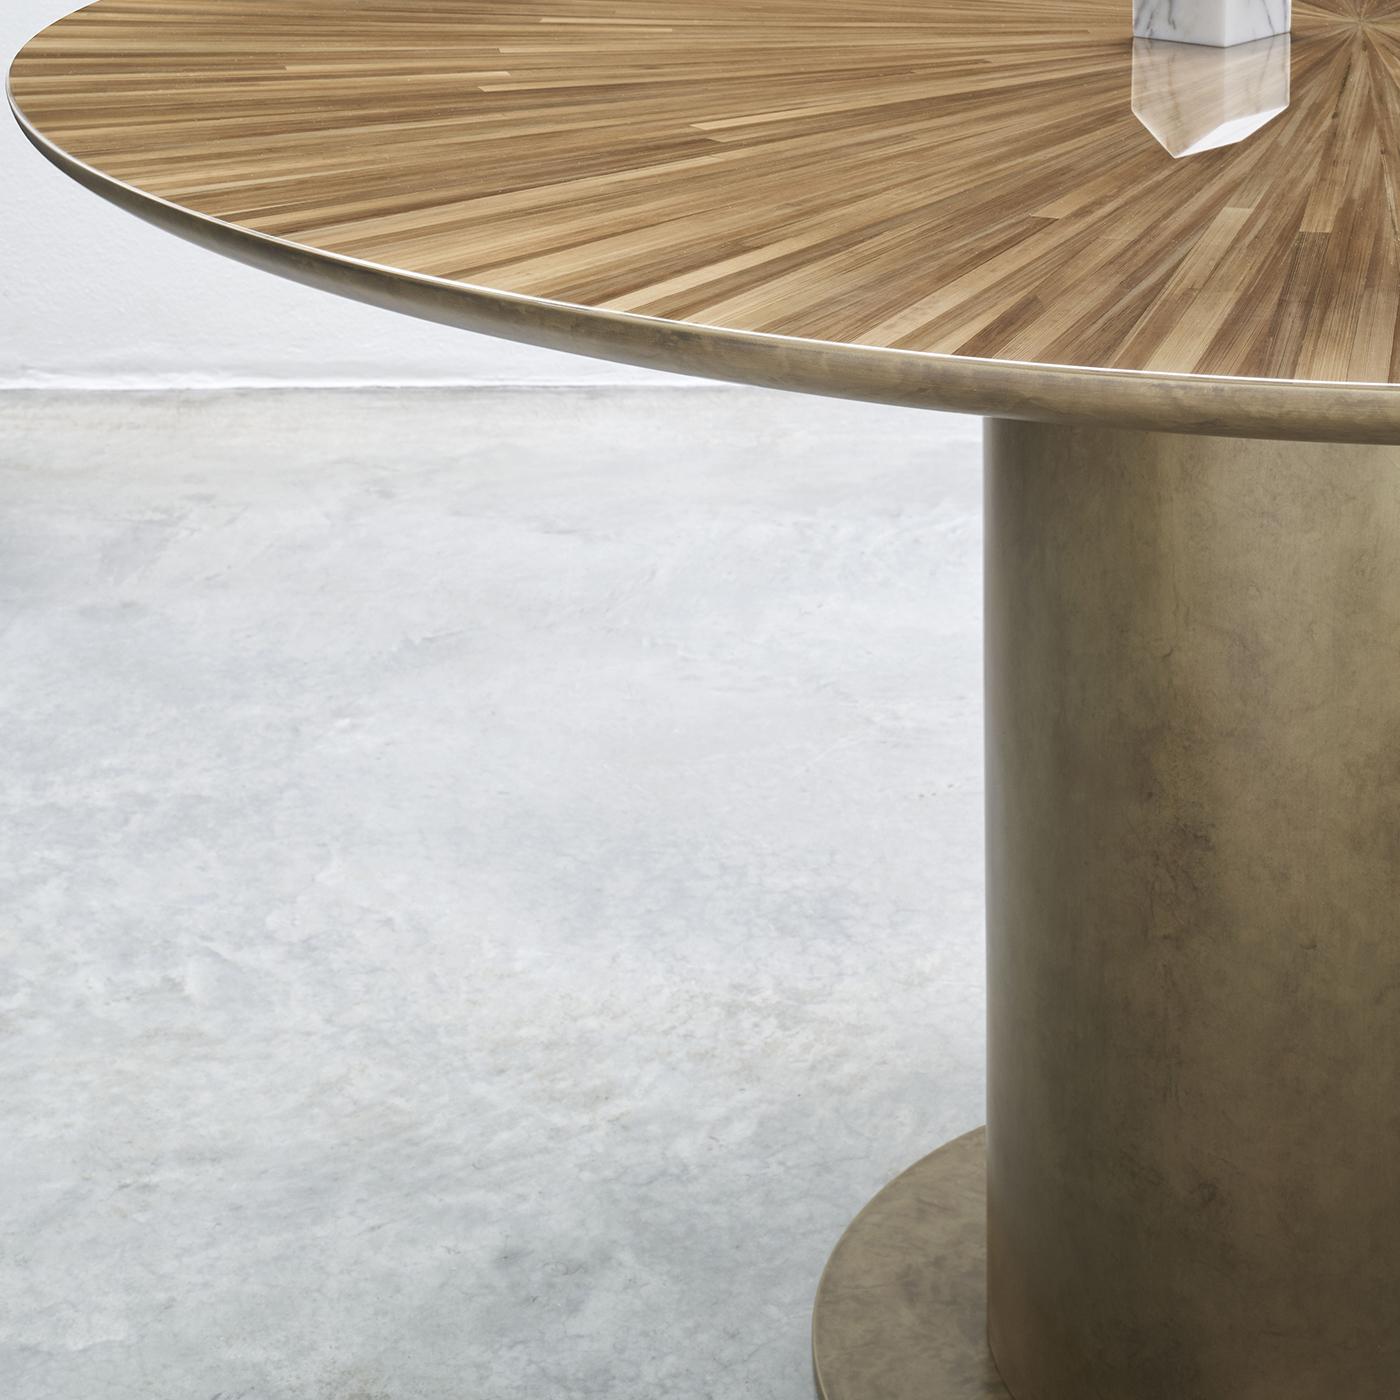 A masterpiece of simple and sculptural geometry, the radius table is designed by Antonio De Marco and Marco Sorrentino. Standing proudly on a monolith base, adorned with liquid metal in an oxidized bronze finish, the table features majestic straw